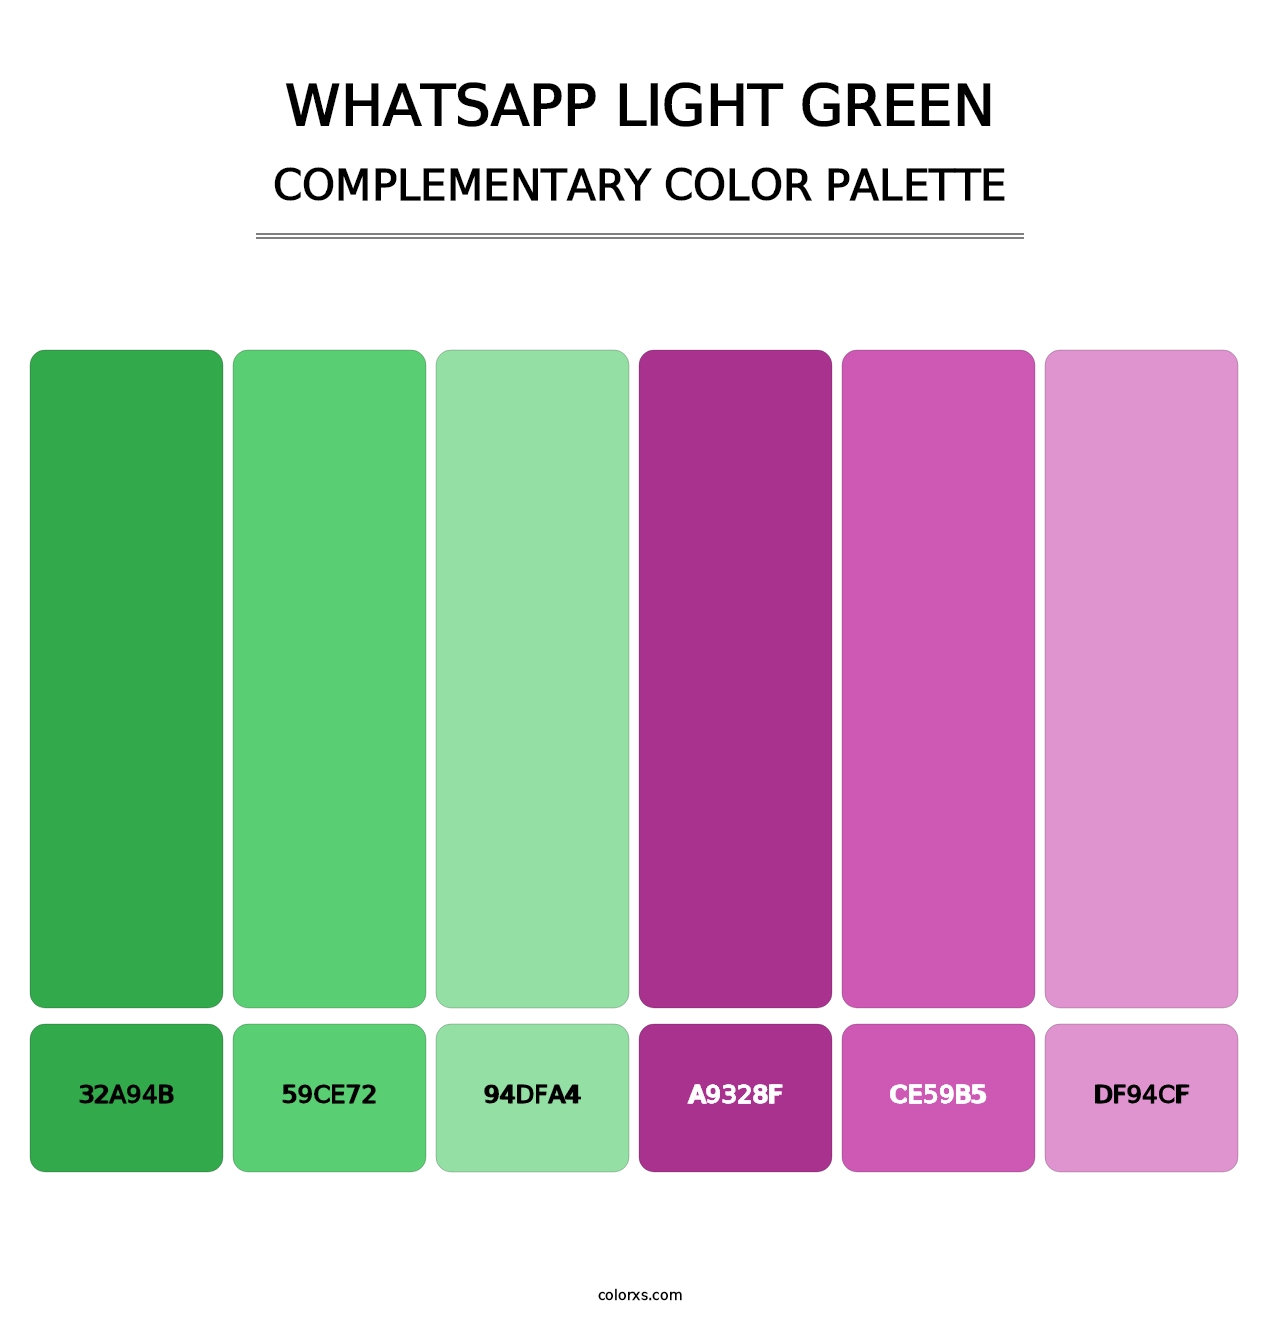 WhatsApp Light Green - Complementary Color Palette